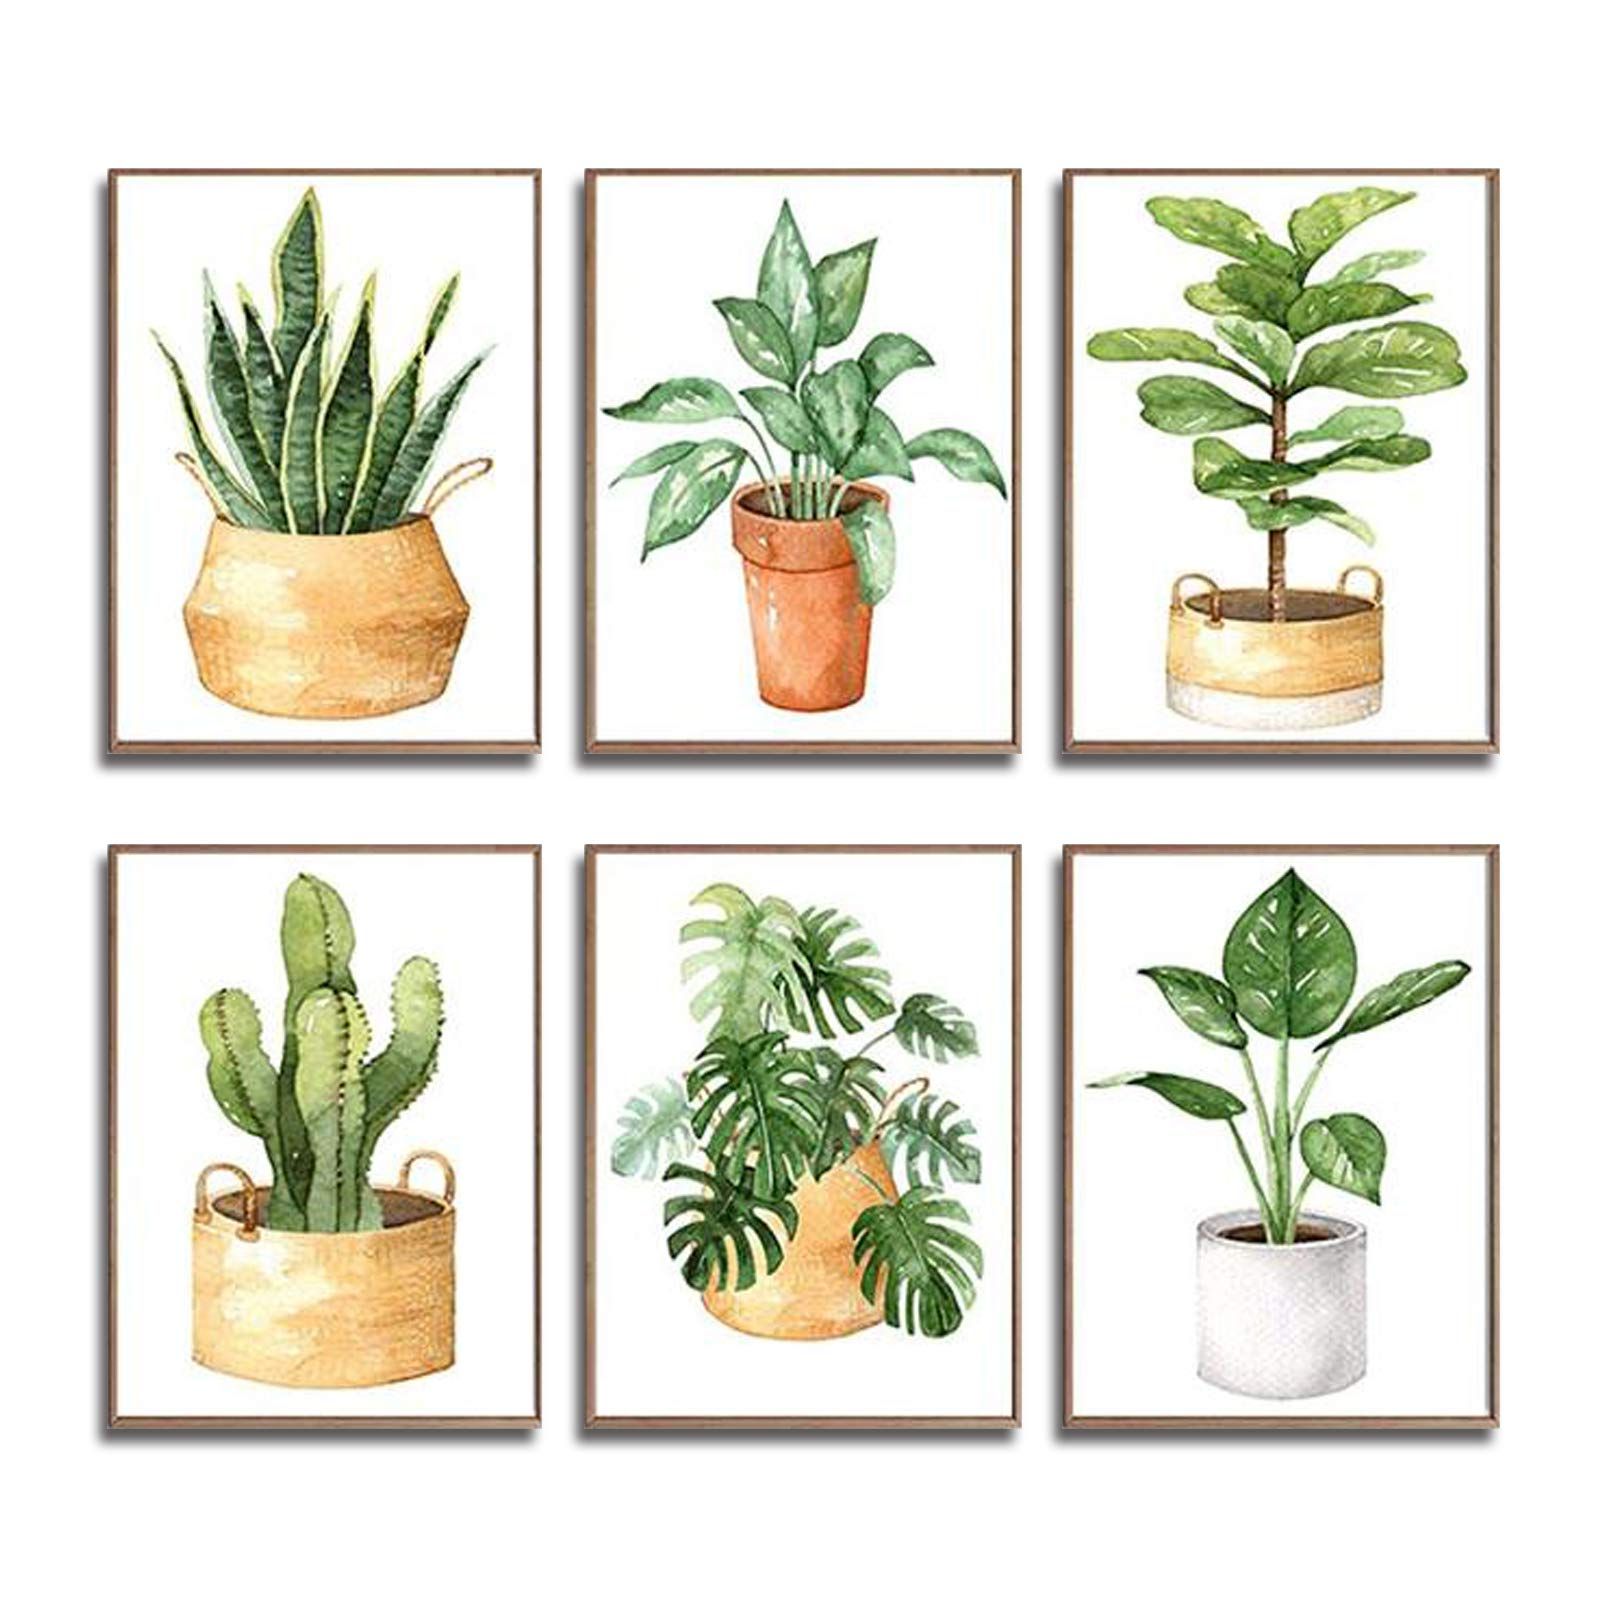 Current Inner Garden Wall Art Intended For Amazon: Imagitek Set Of 6 Unframed Watercolor House Plant Wall Art  Prints, Monstera Leaf Wall Art, Cactus Wall Art, Greenery Poster, Indoor  Garden Art Print Gallery Wall Decor (8" X 10"): Posters (View 7 of 15)